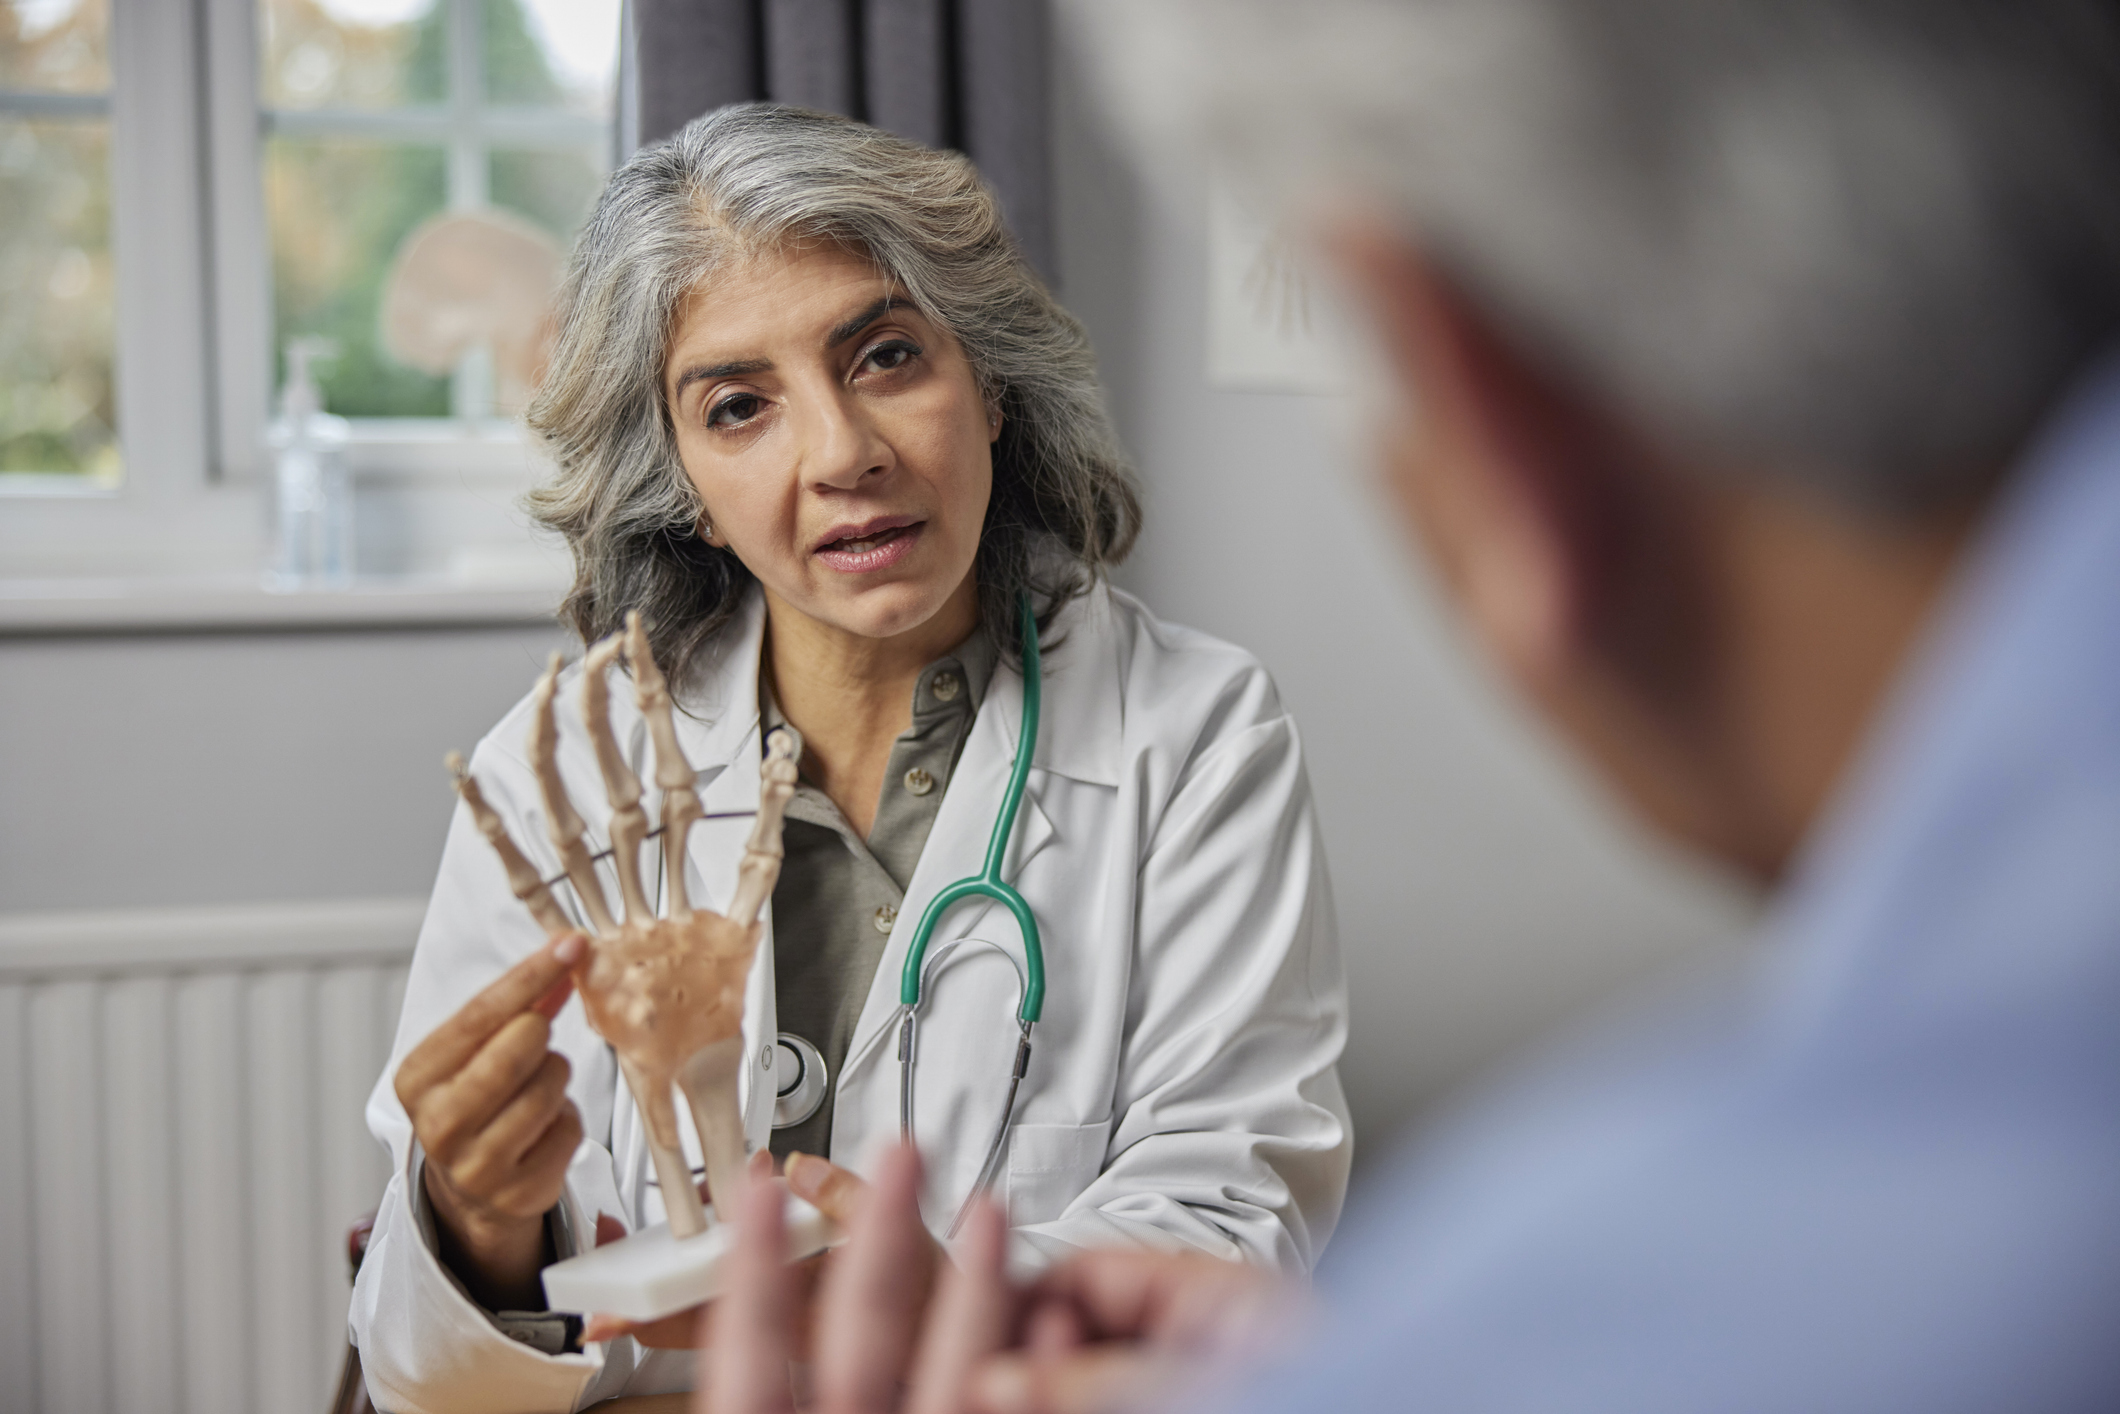 A mature female doctor with brown skin and gray-black hair meets with a blurred-out male patient to explain joint pain using an anatomical model of a hand